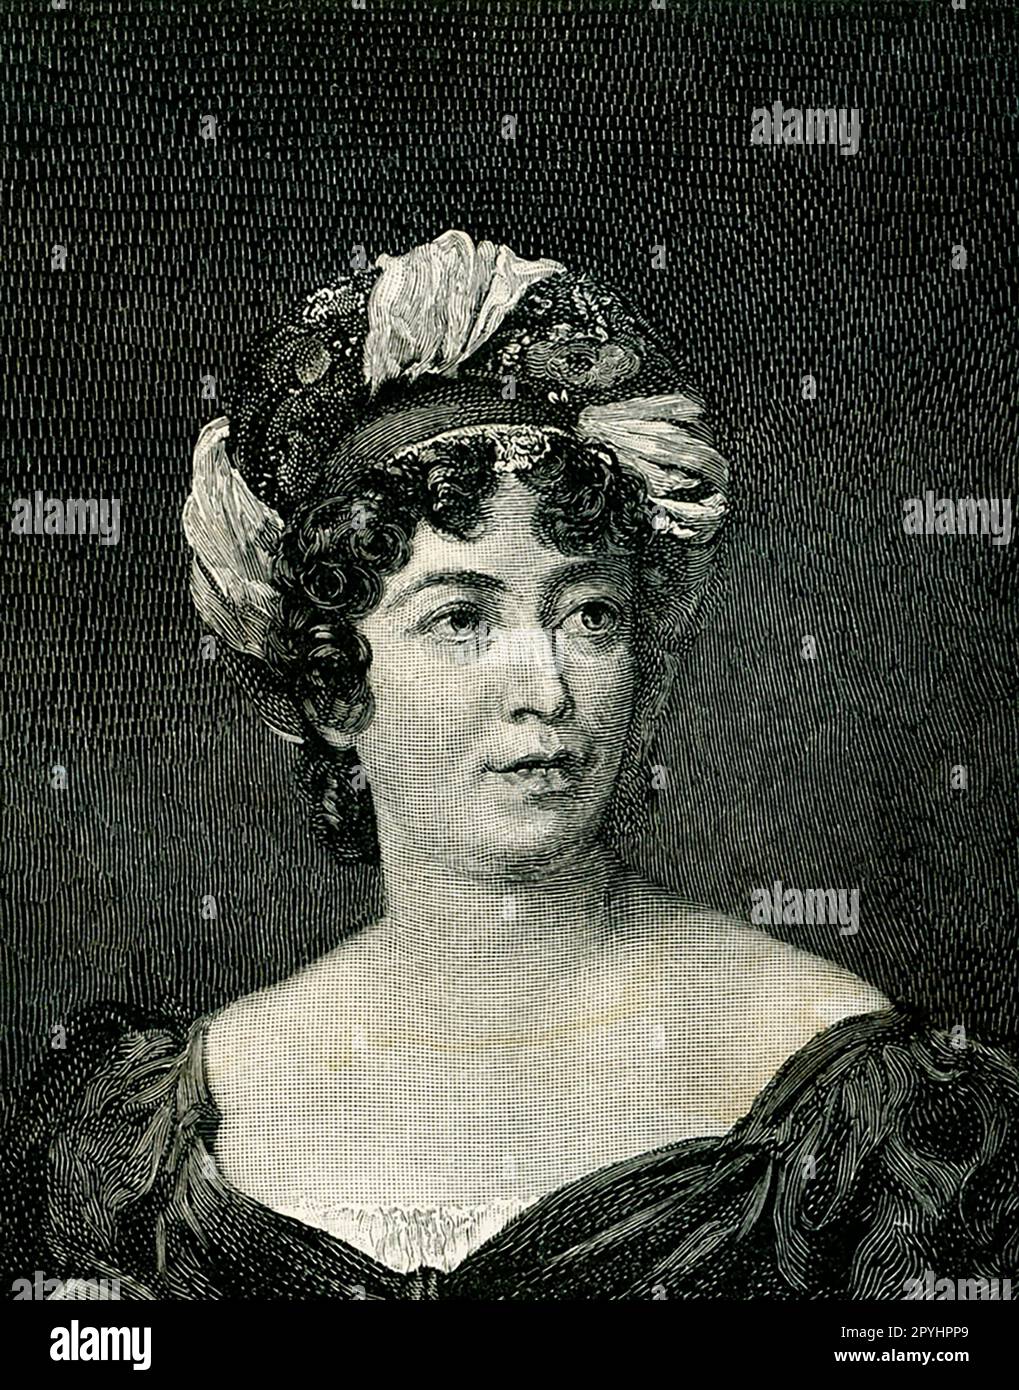 This image from a painting by Francois Gerard is of Mme. De Stael. It was engraved by R G Tietze. Madame de Staël (1766-1817) was a politically engaged woman of letters, who survived the French Revolution and was exiled more than once by Napoleon. François Pascal Simon Gérard, titled as Baron Gérard in 1809, was a prominent French painter. He was born in Rome, where his father occupied a post in the house of the French ambassador. Stock Photo